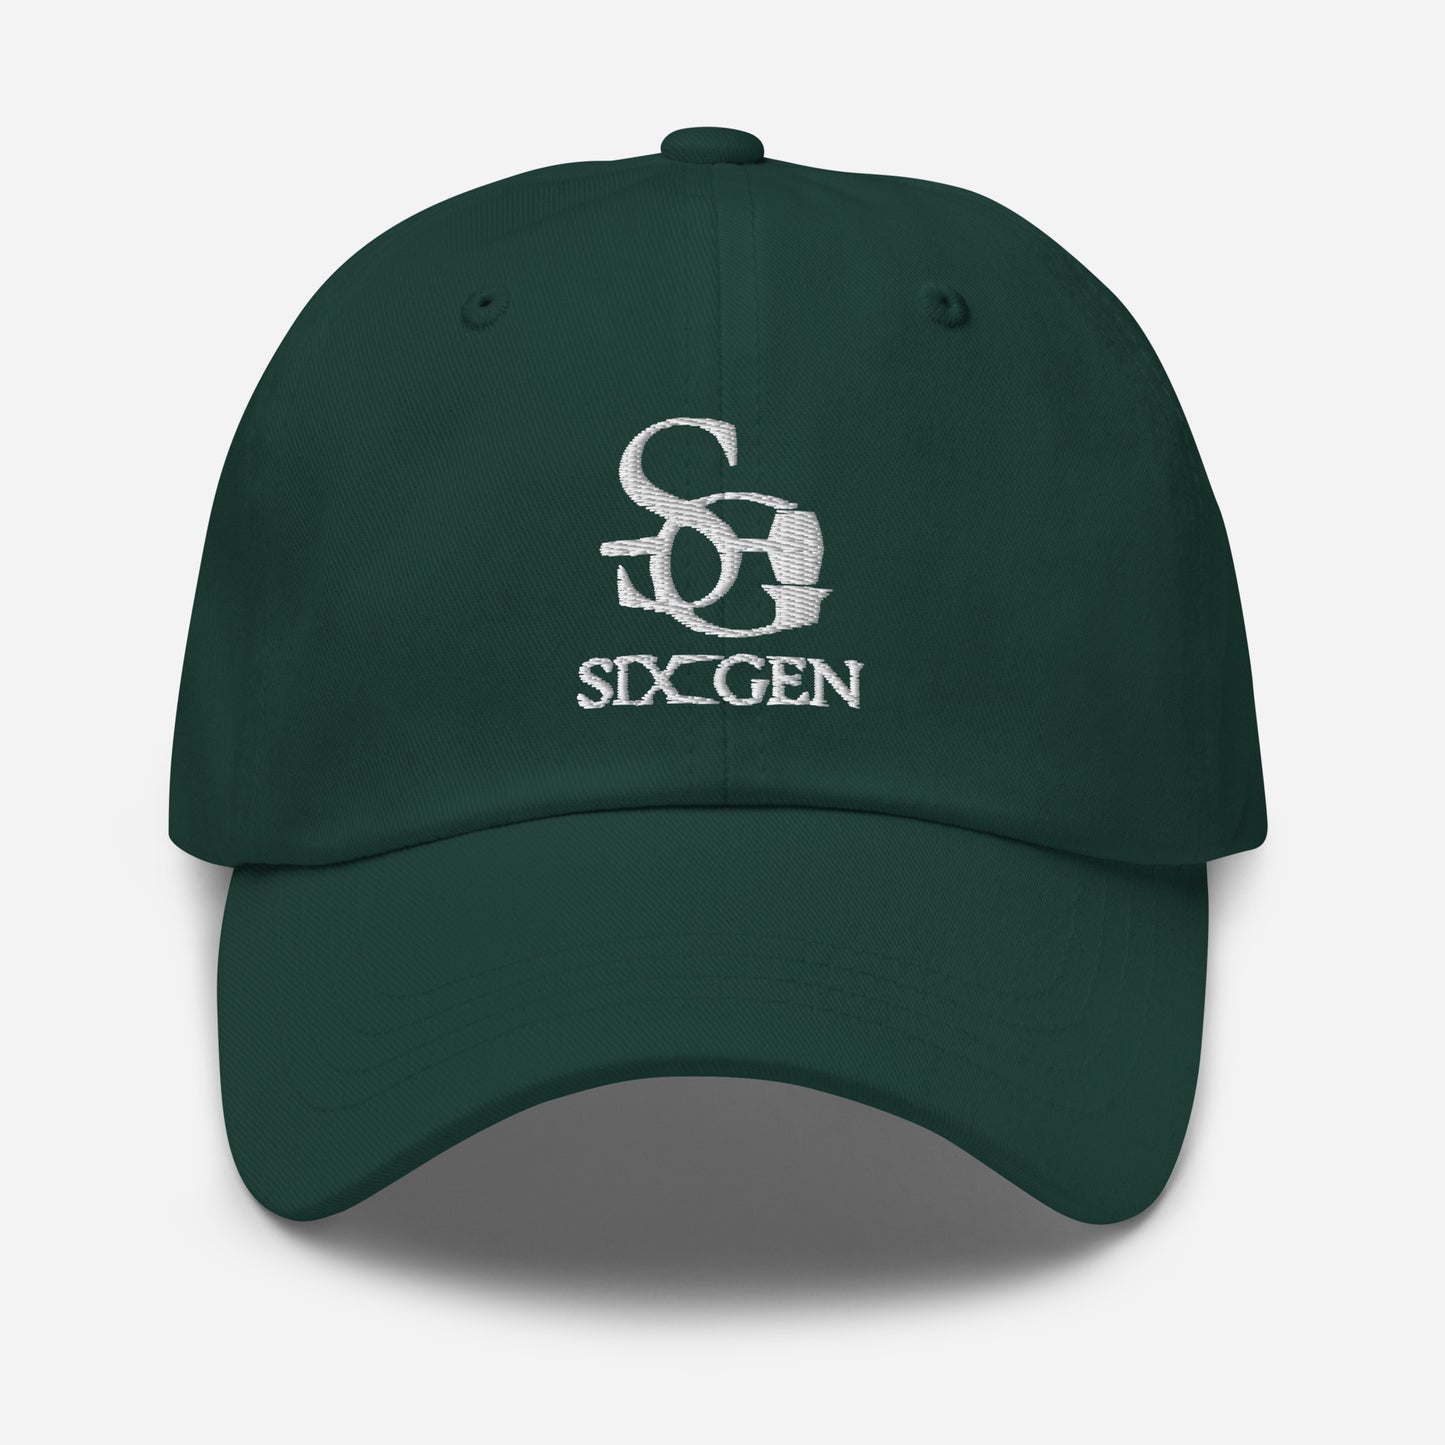 Green hat with six gen white logo